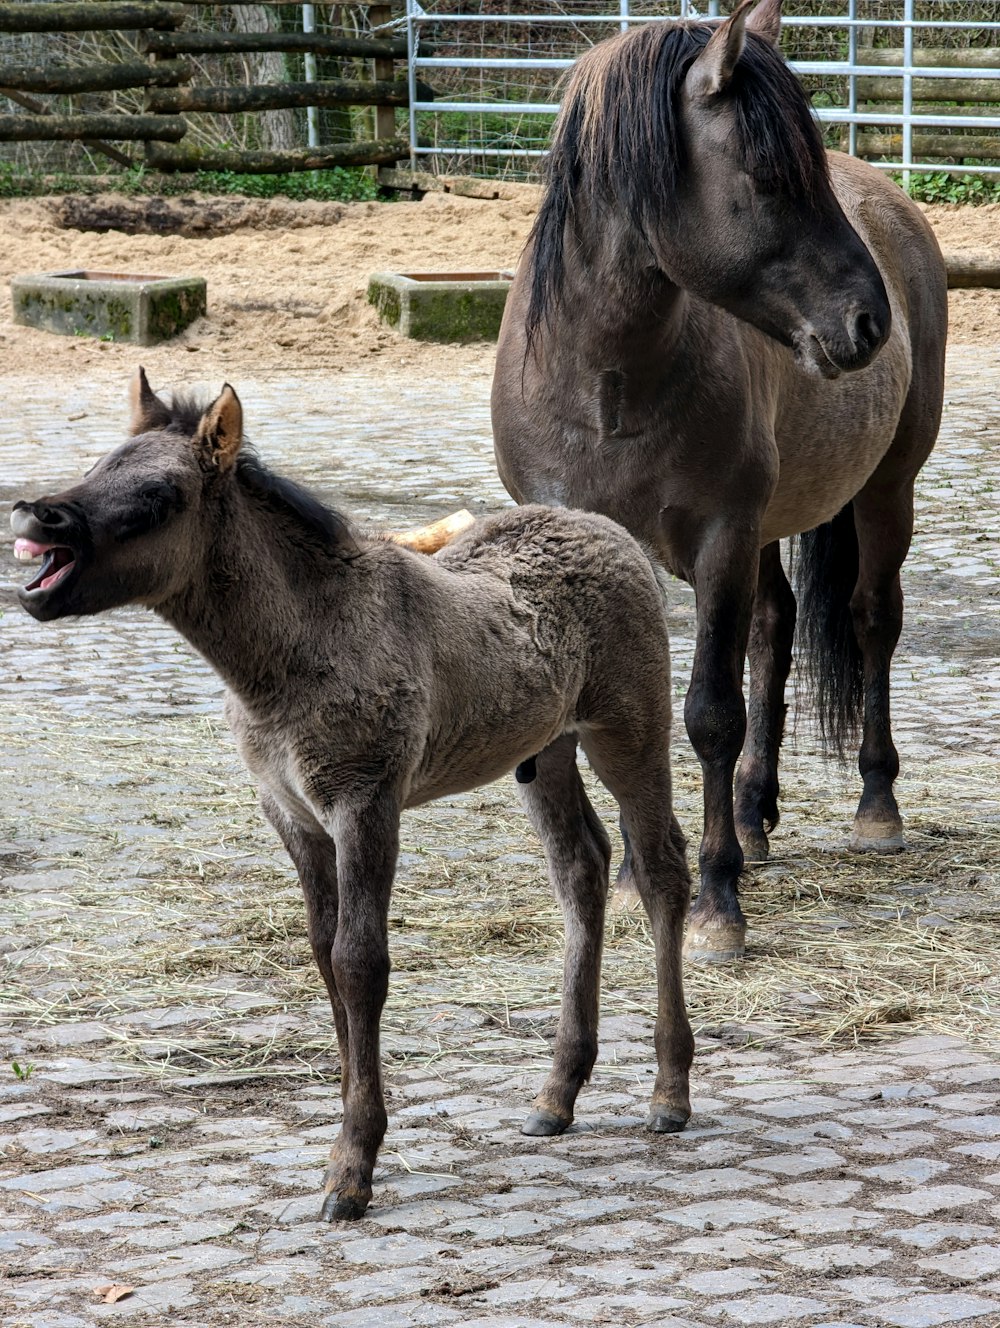 a baby horse standing next to an adult horse